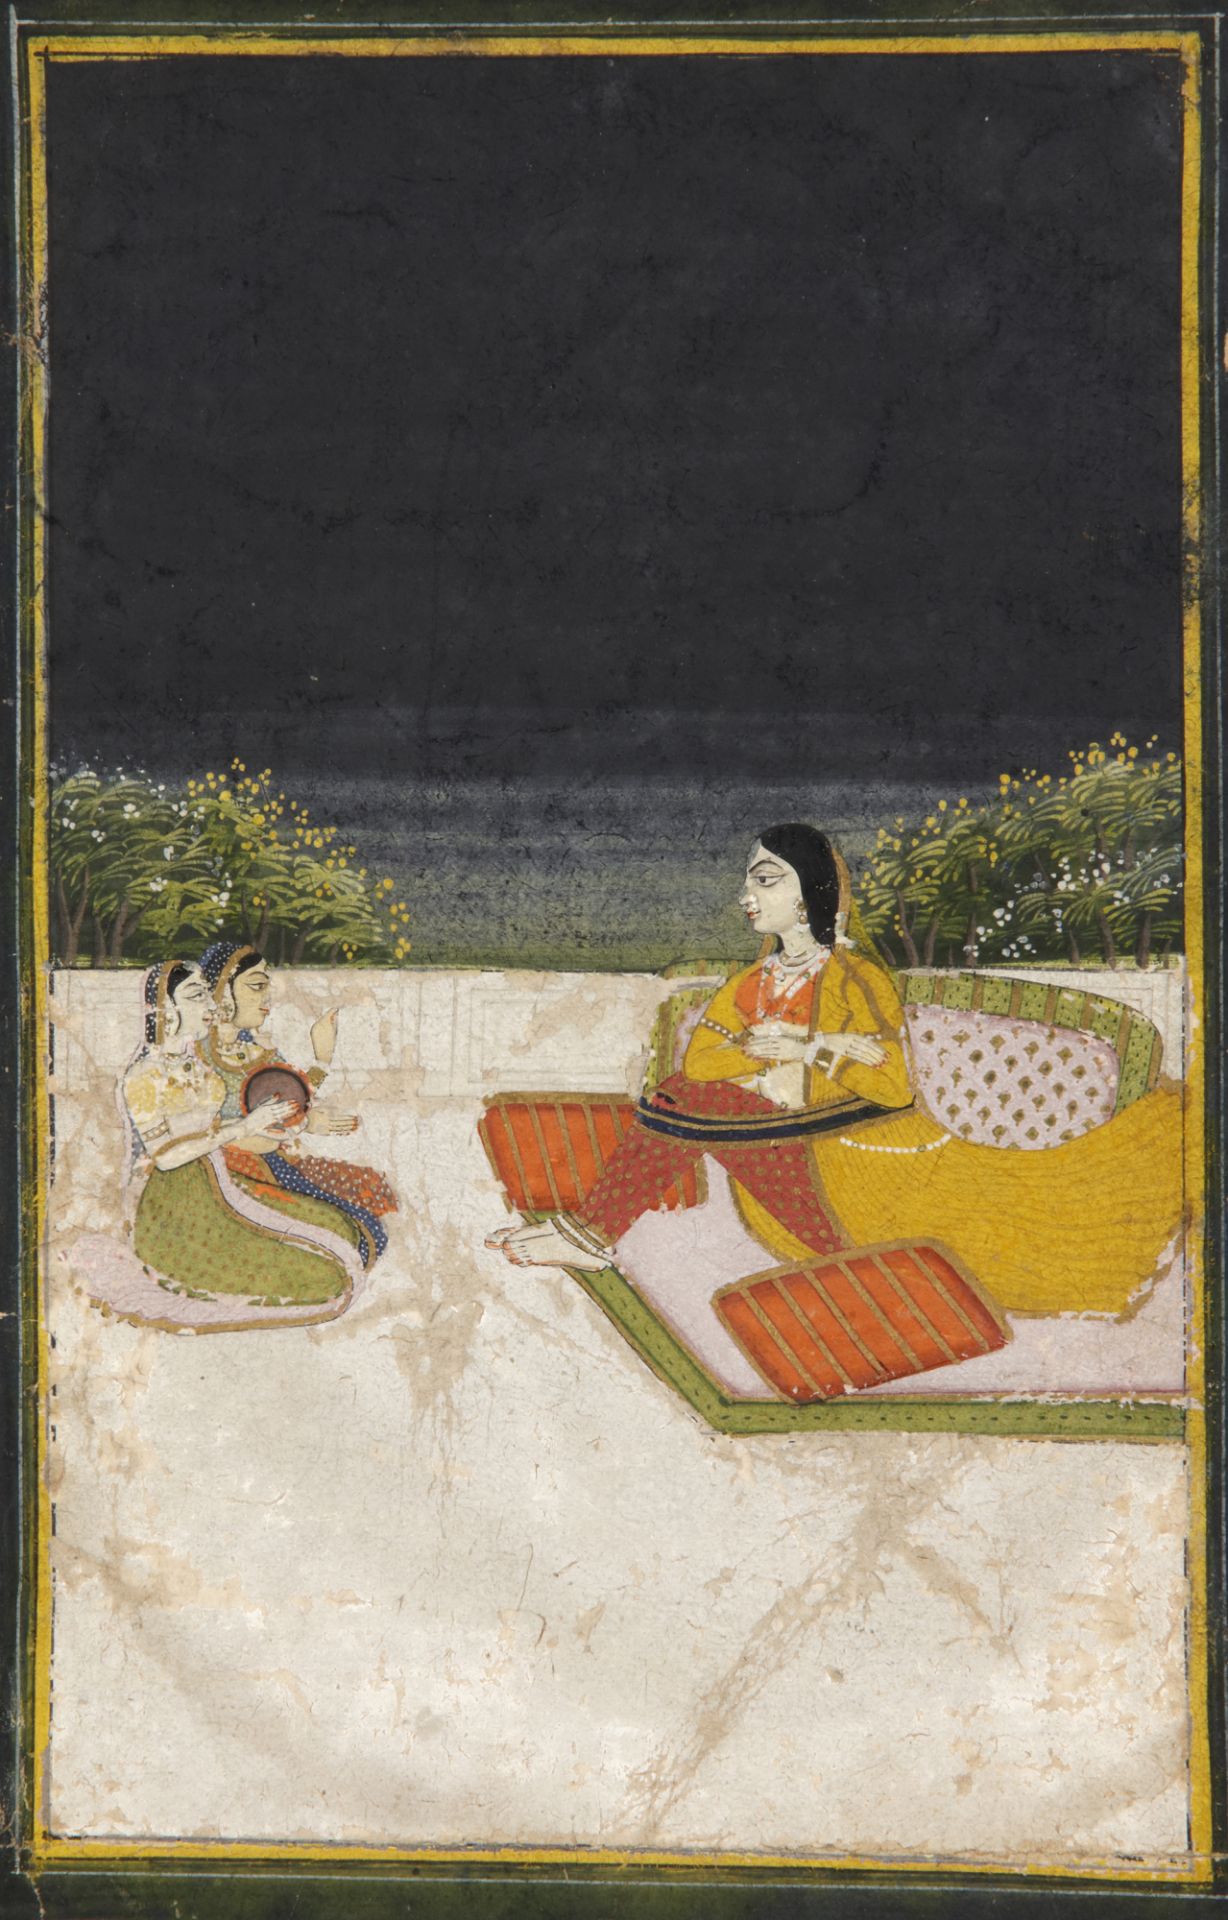 A LADY WITH ATTENDANTS ON A TERRACE, INDIA JAIPUR, 18TH CENTURY